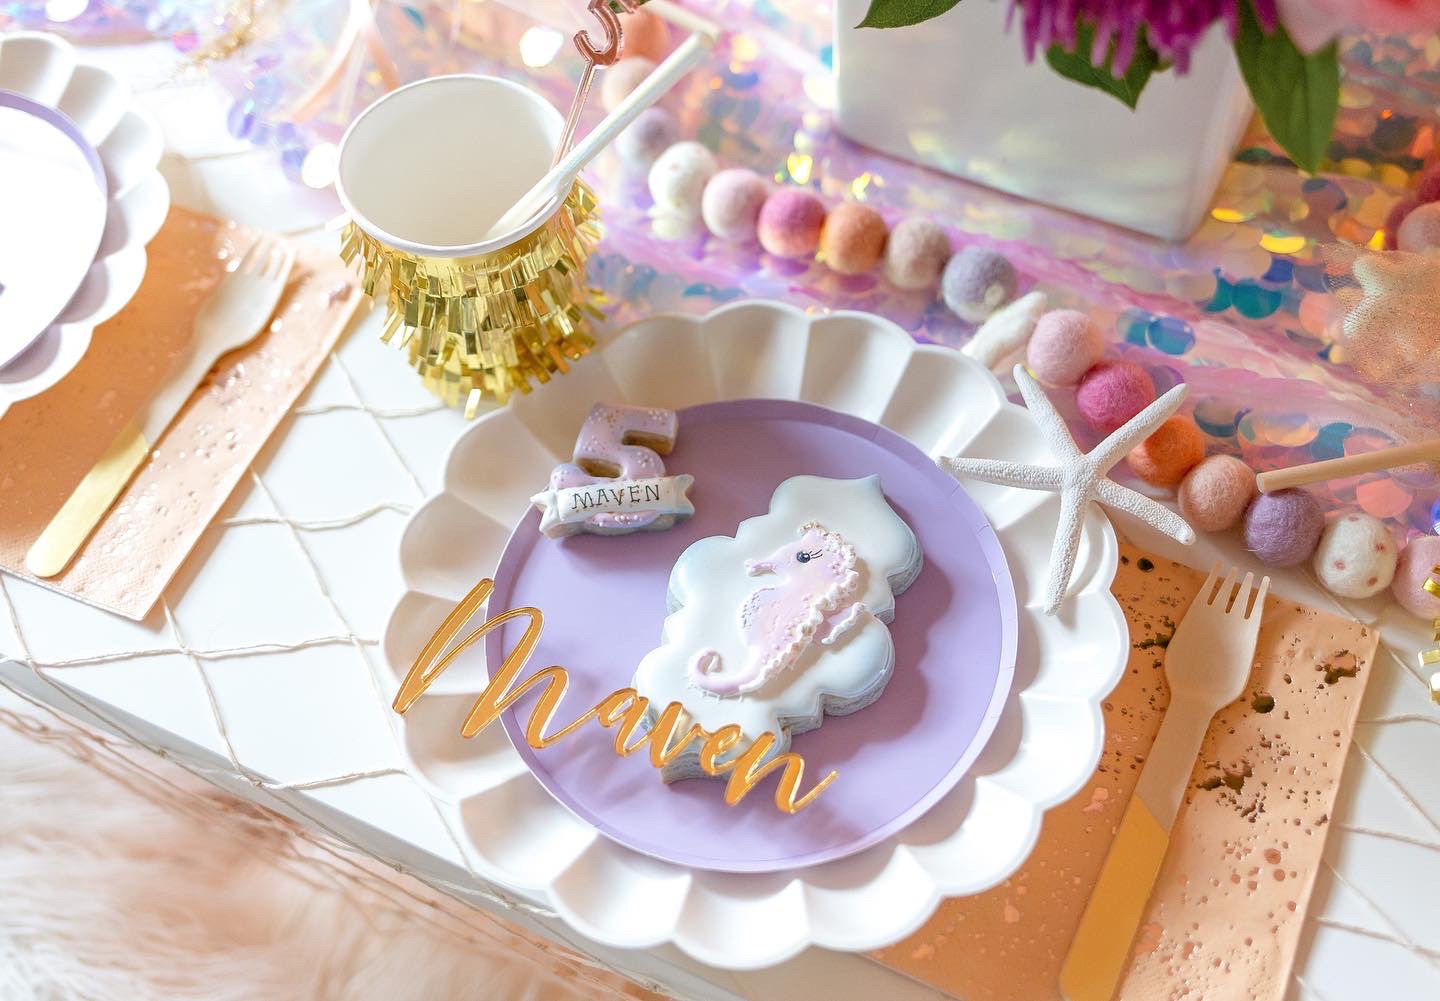 Seahorse cookie on purple plate for little girls 5th birthday